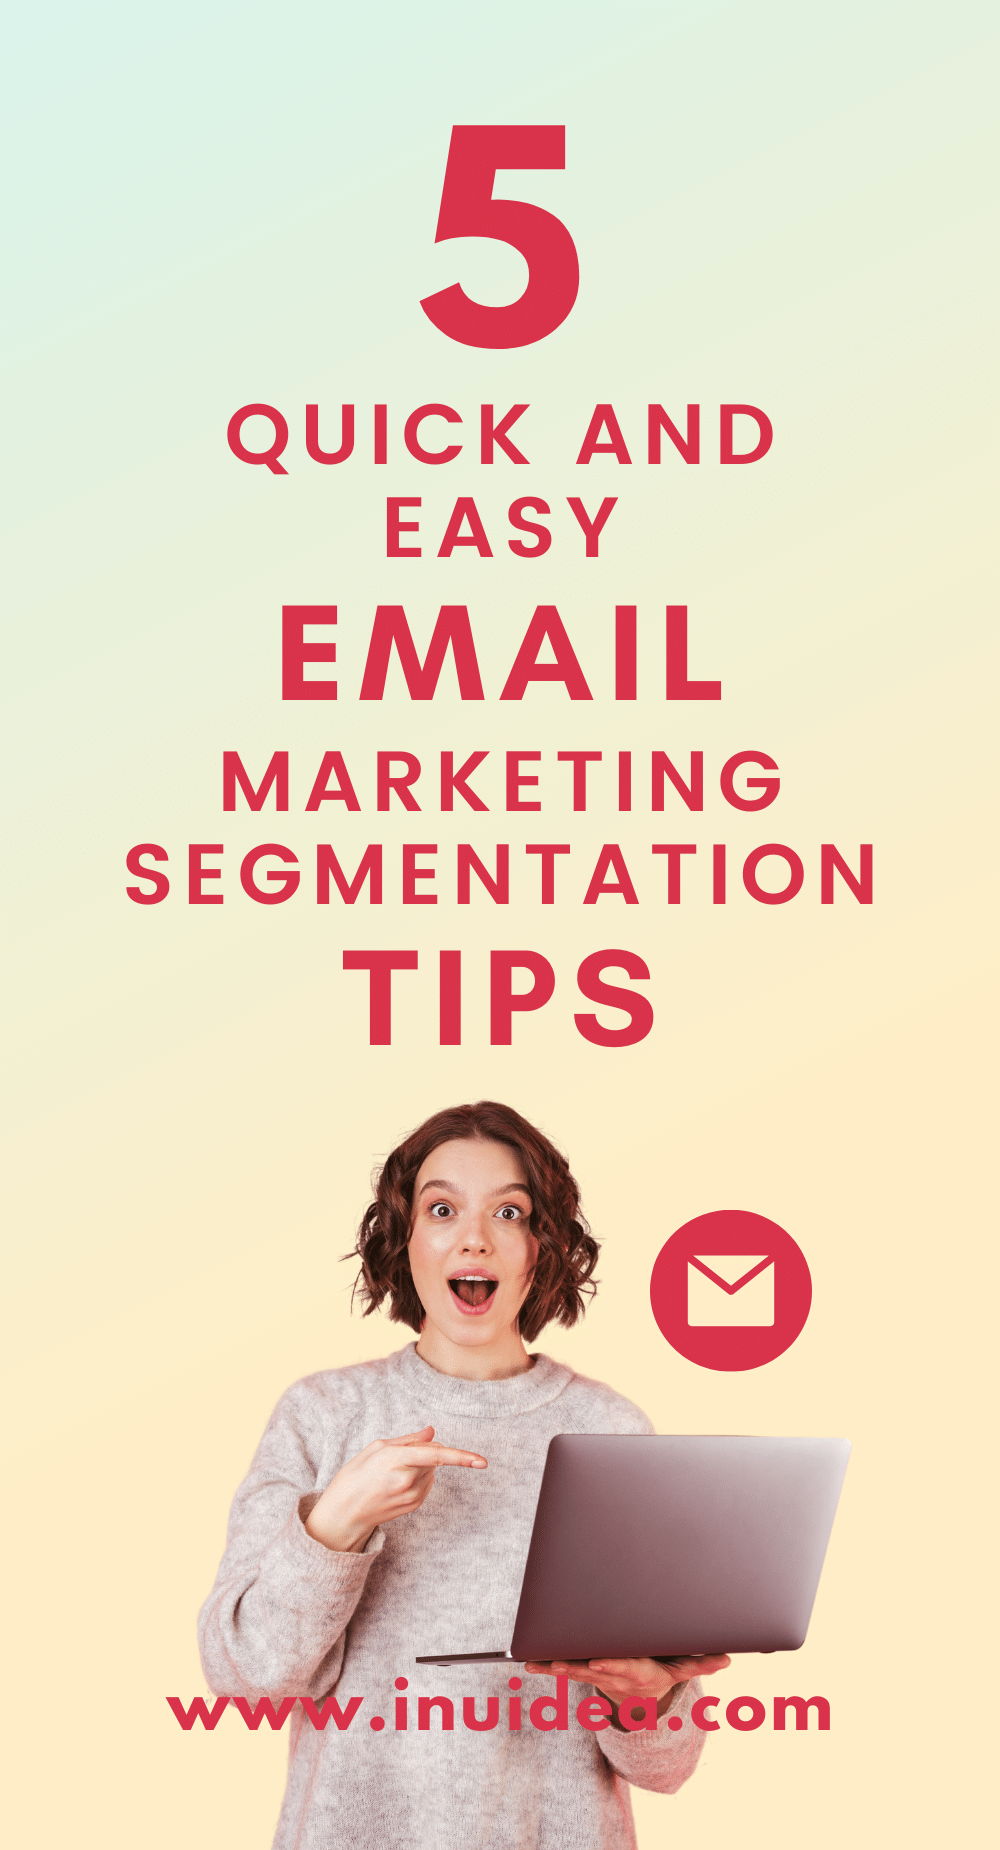 5 Quick and Easy Email Marketing Segmentation Tips